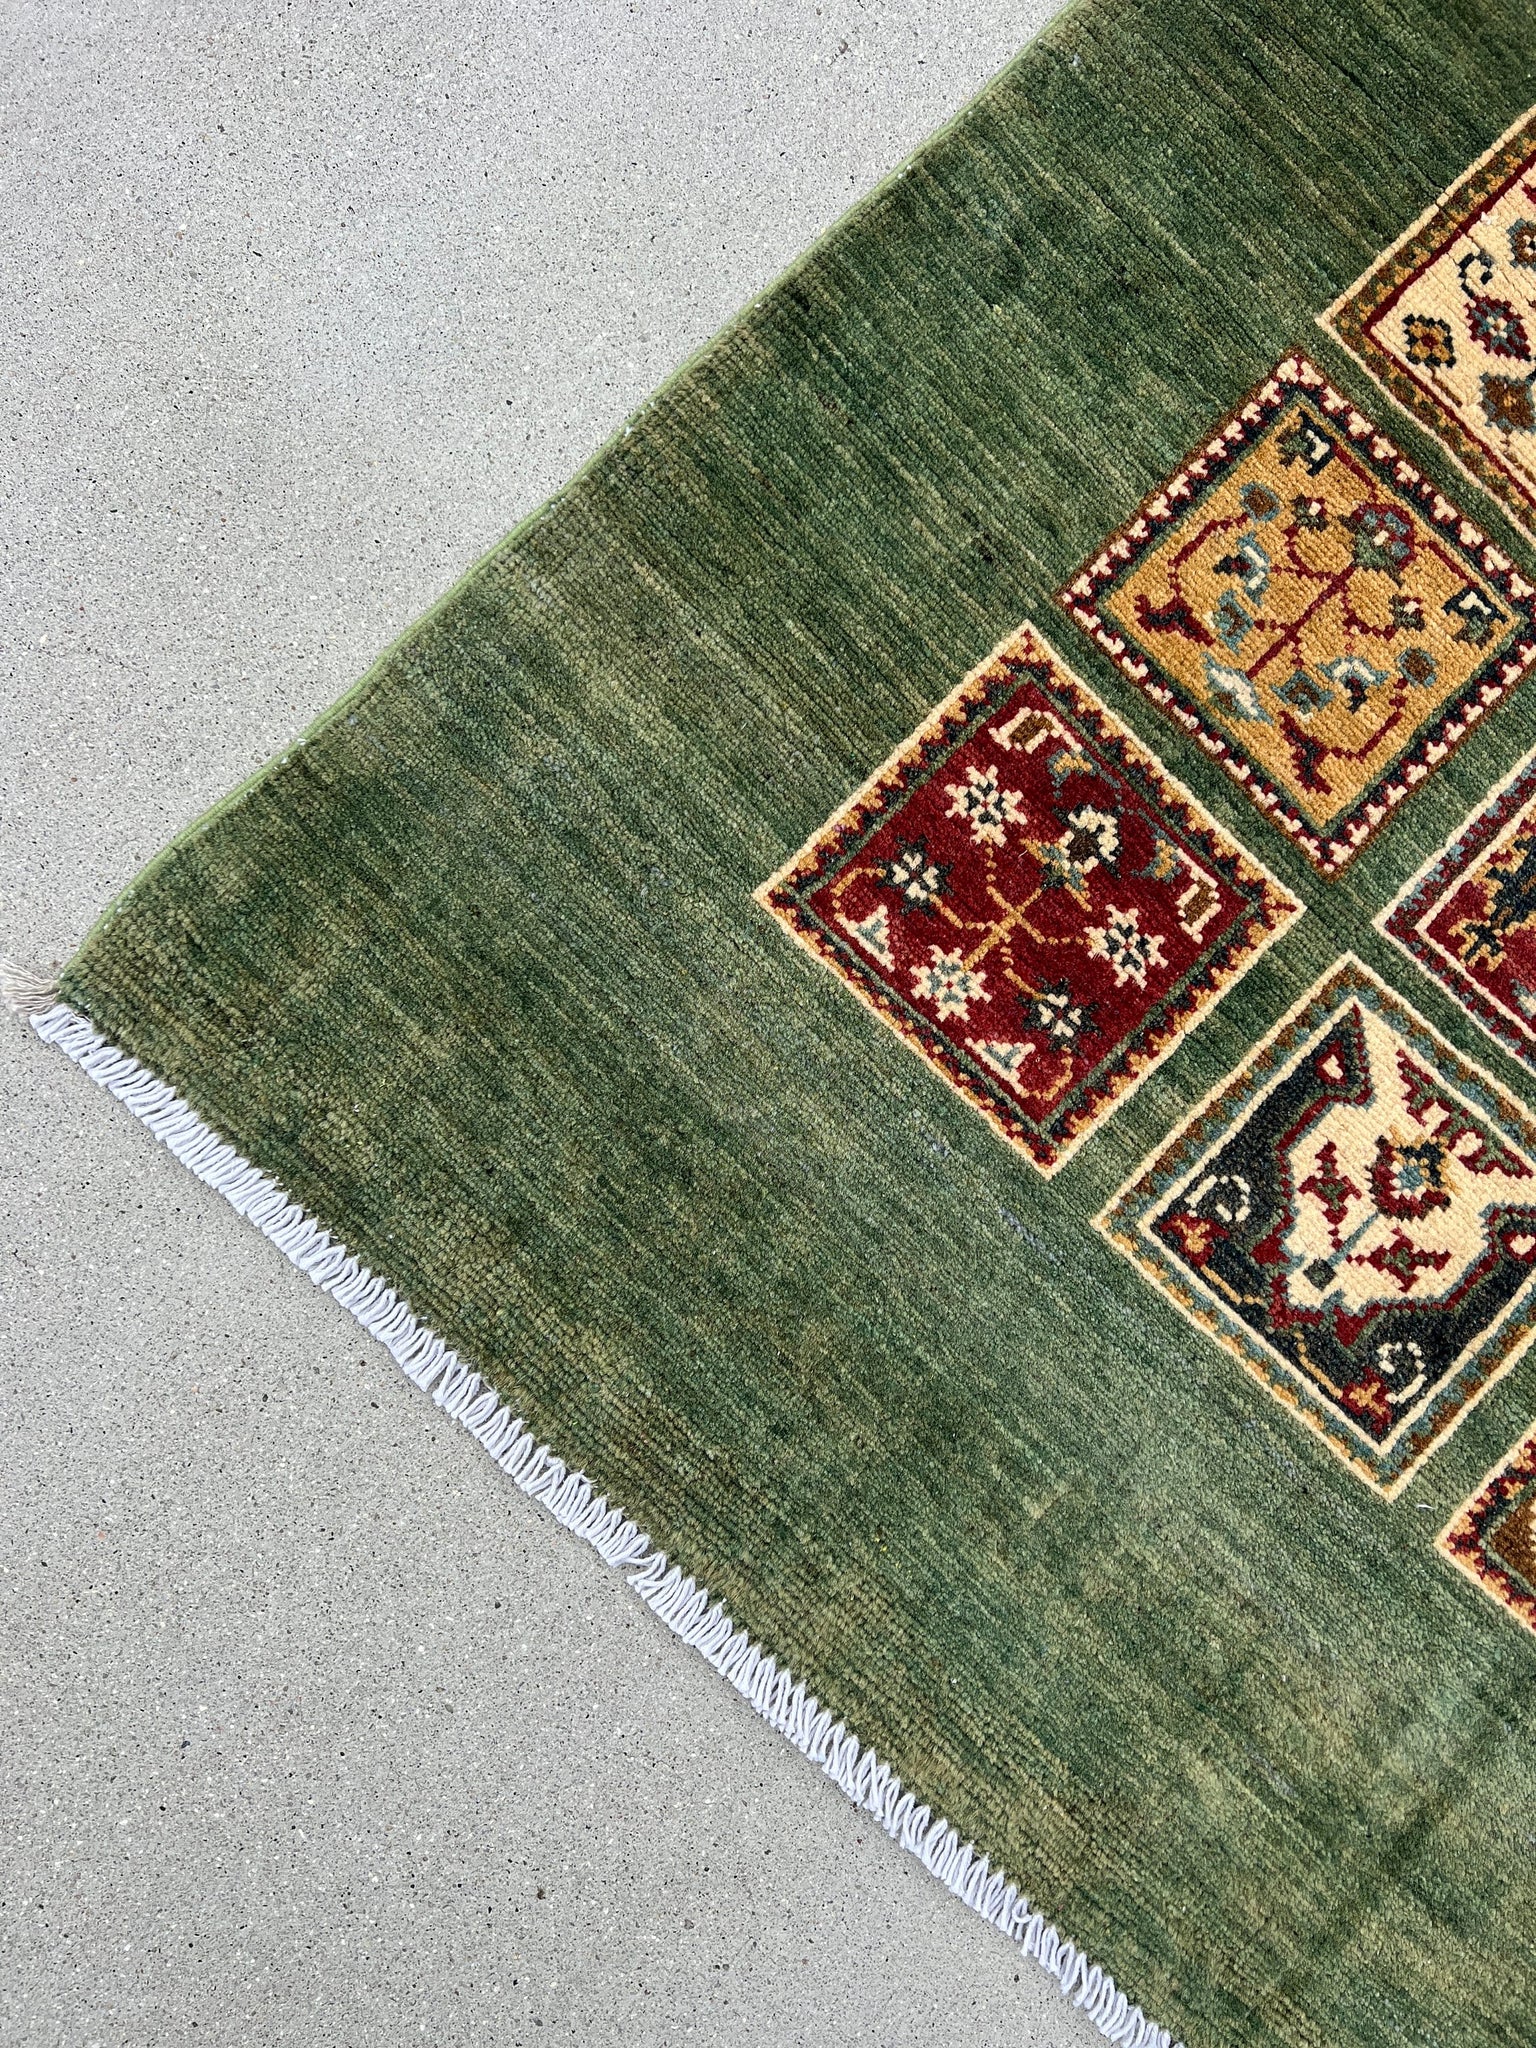 3x4 (100x180) Handmade Afghan Rug | Moss Green Maroon Red Beige Golden Brown Turquoise Denim Blue | Wool Hand Knotted Oushak Bohemian Floral